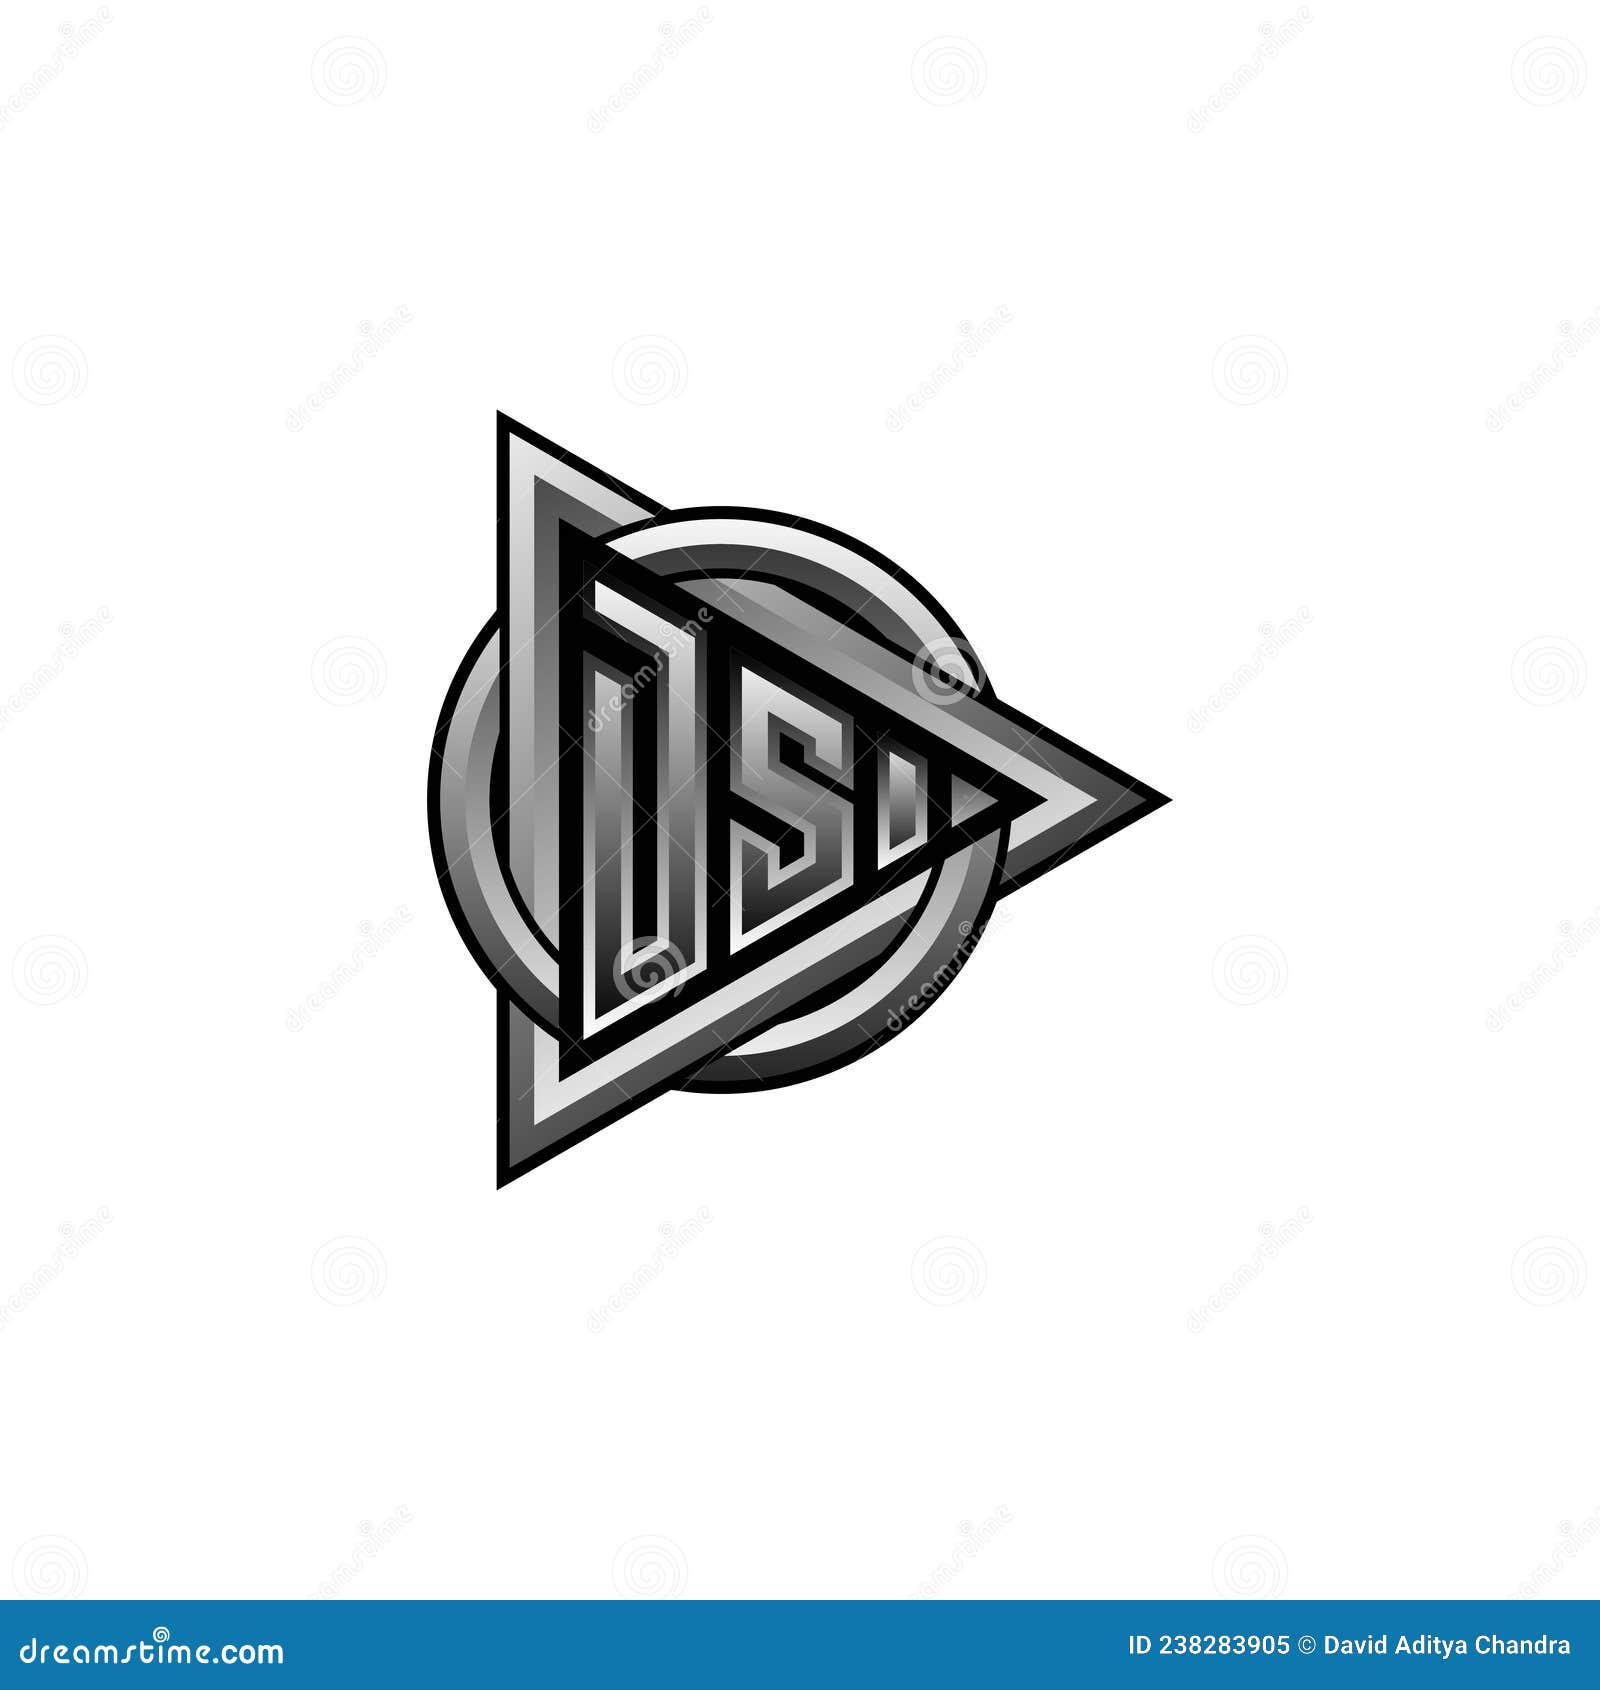 Ds letter initial with royal wing logo template Vector Image